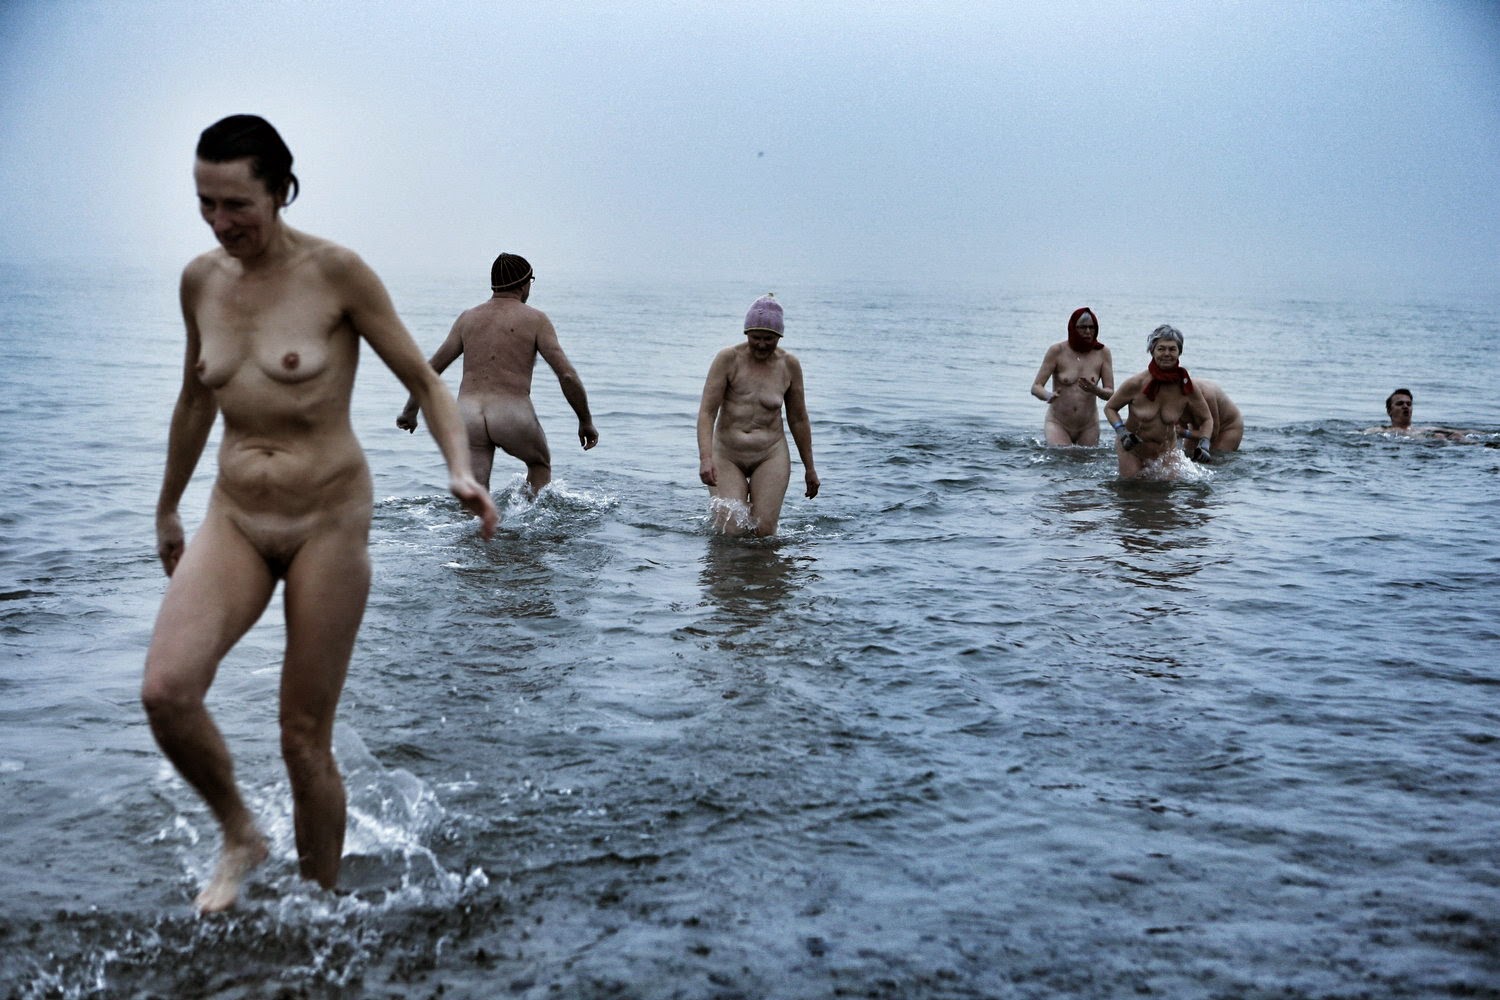 Group nudists - World Record Skinny-dip attempt.